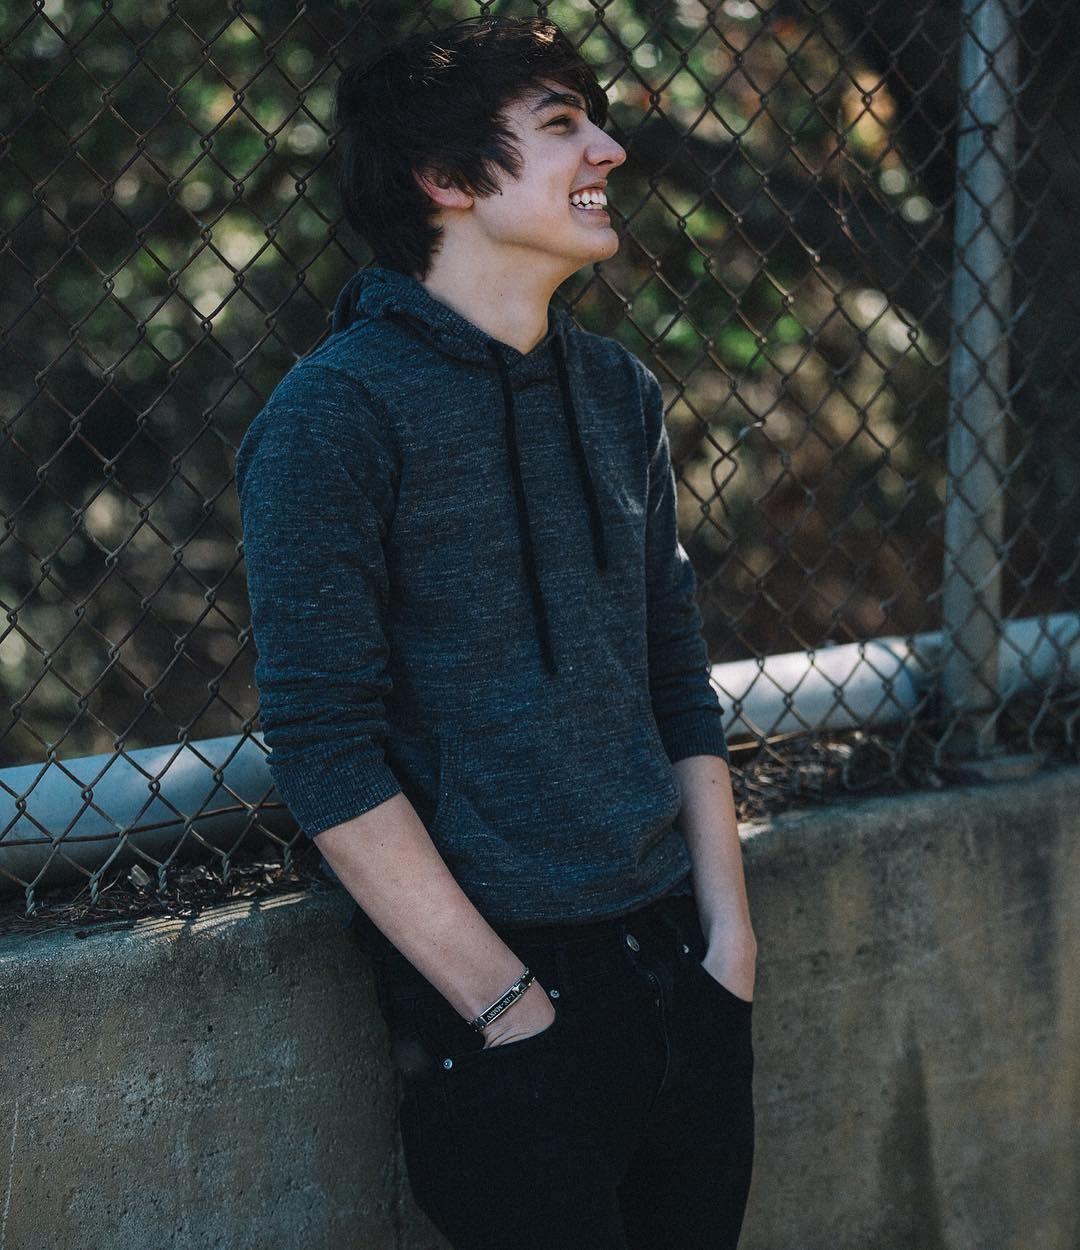 Colby Brock, his smile, his style, his personality